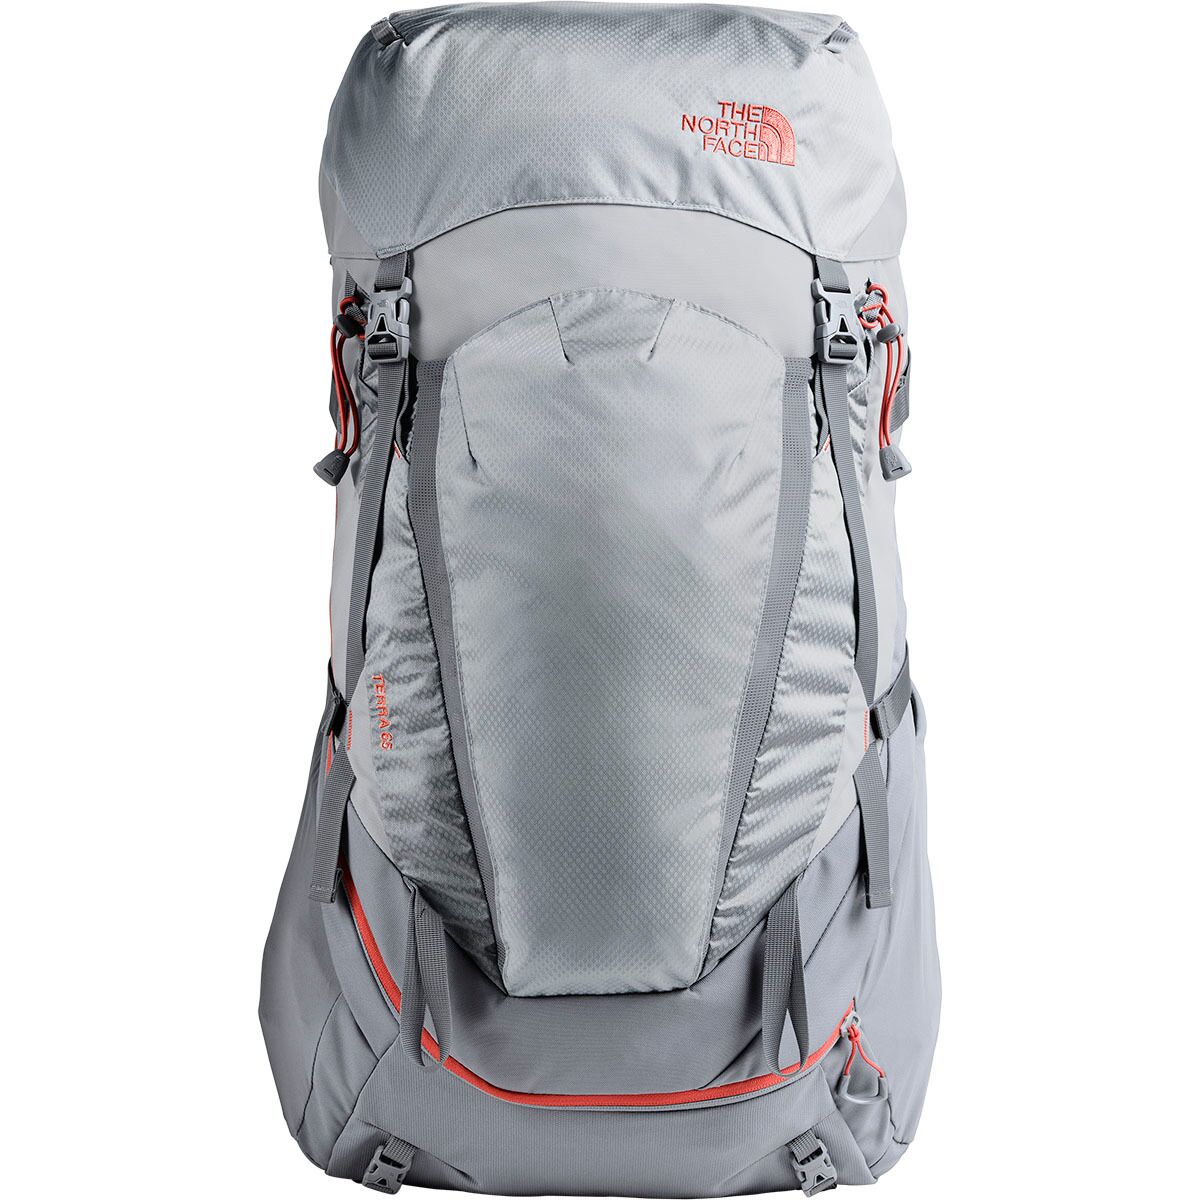 The North Face Terra 55L Backpack - Women's - Hike & Camp